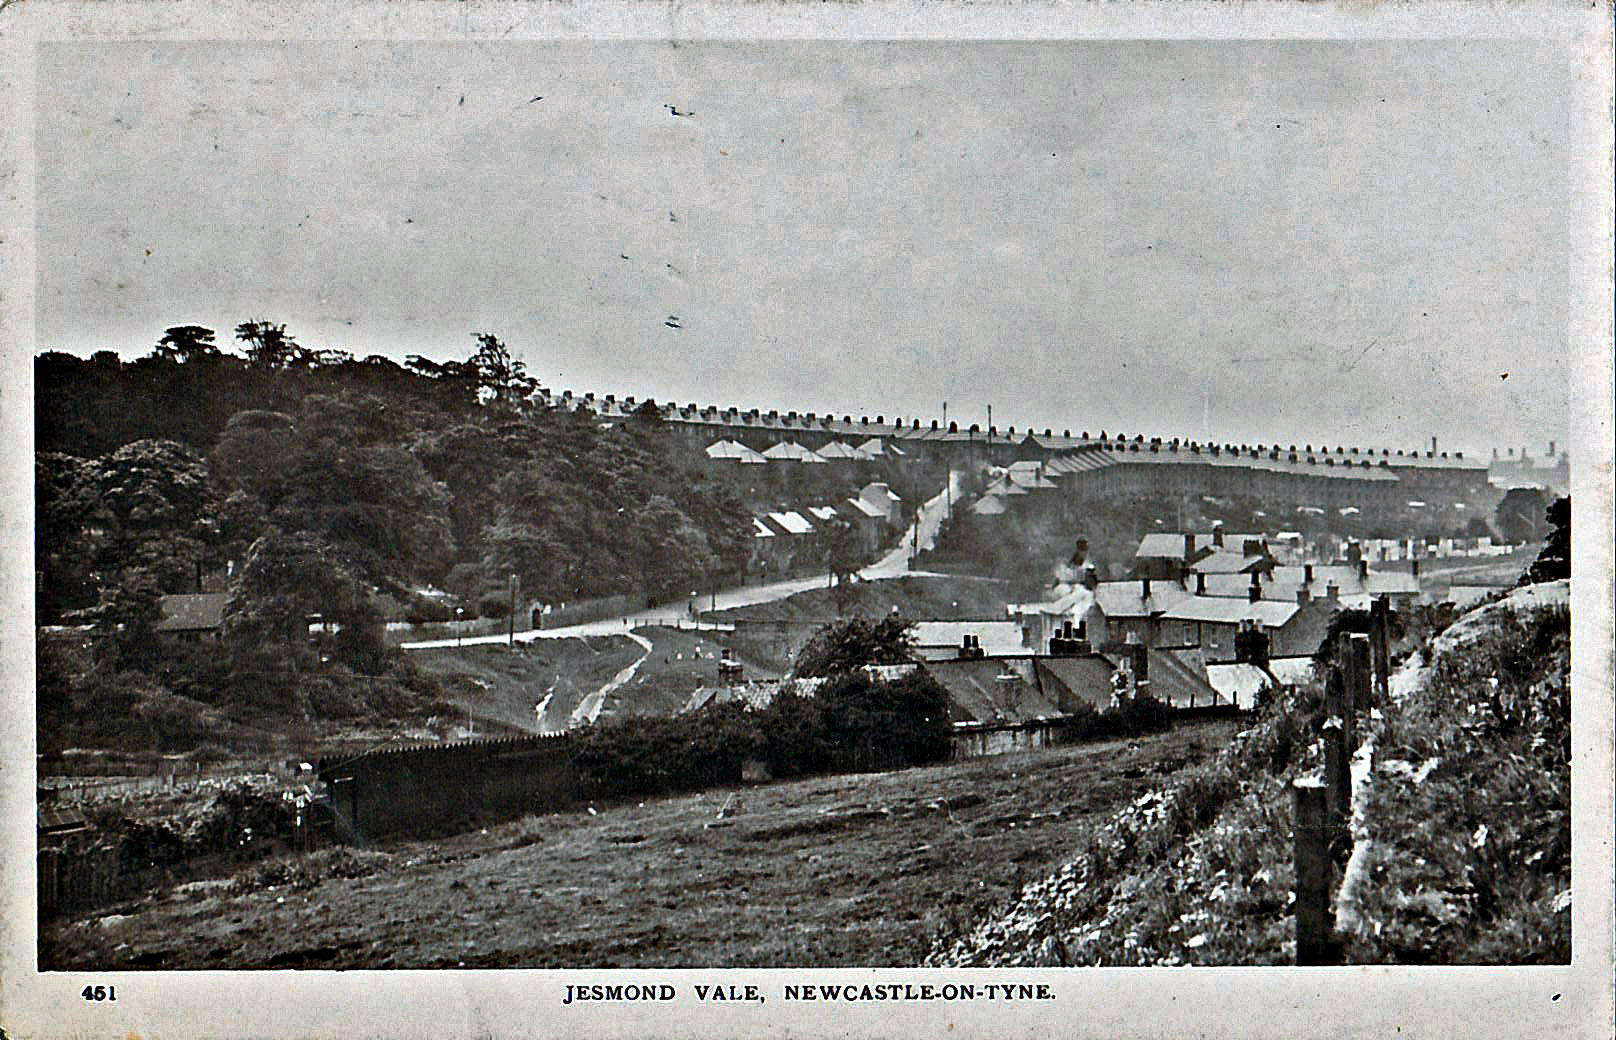 Image of Jesmond Vale from an old postcard